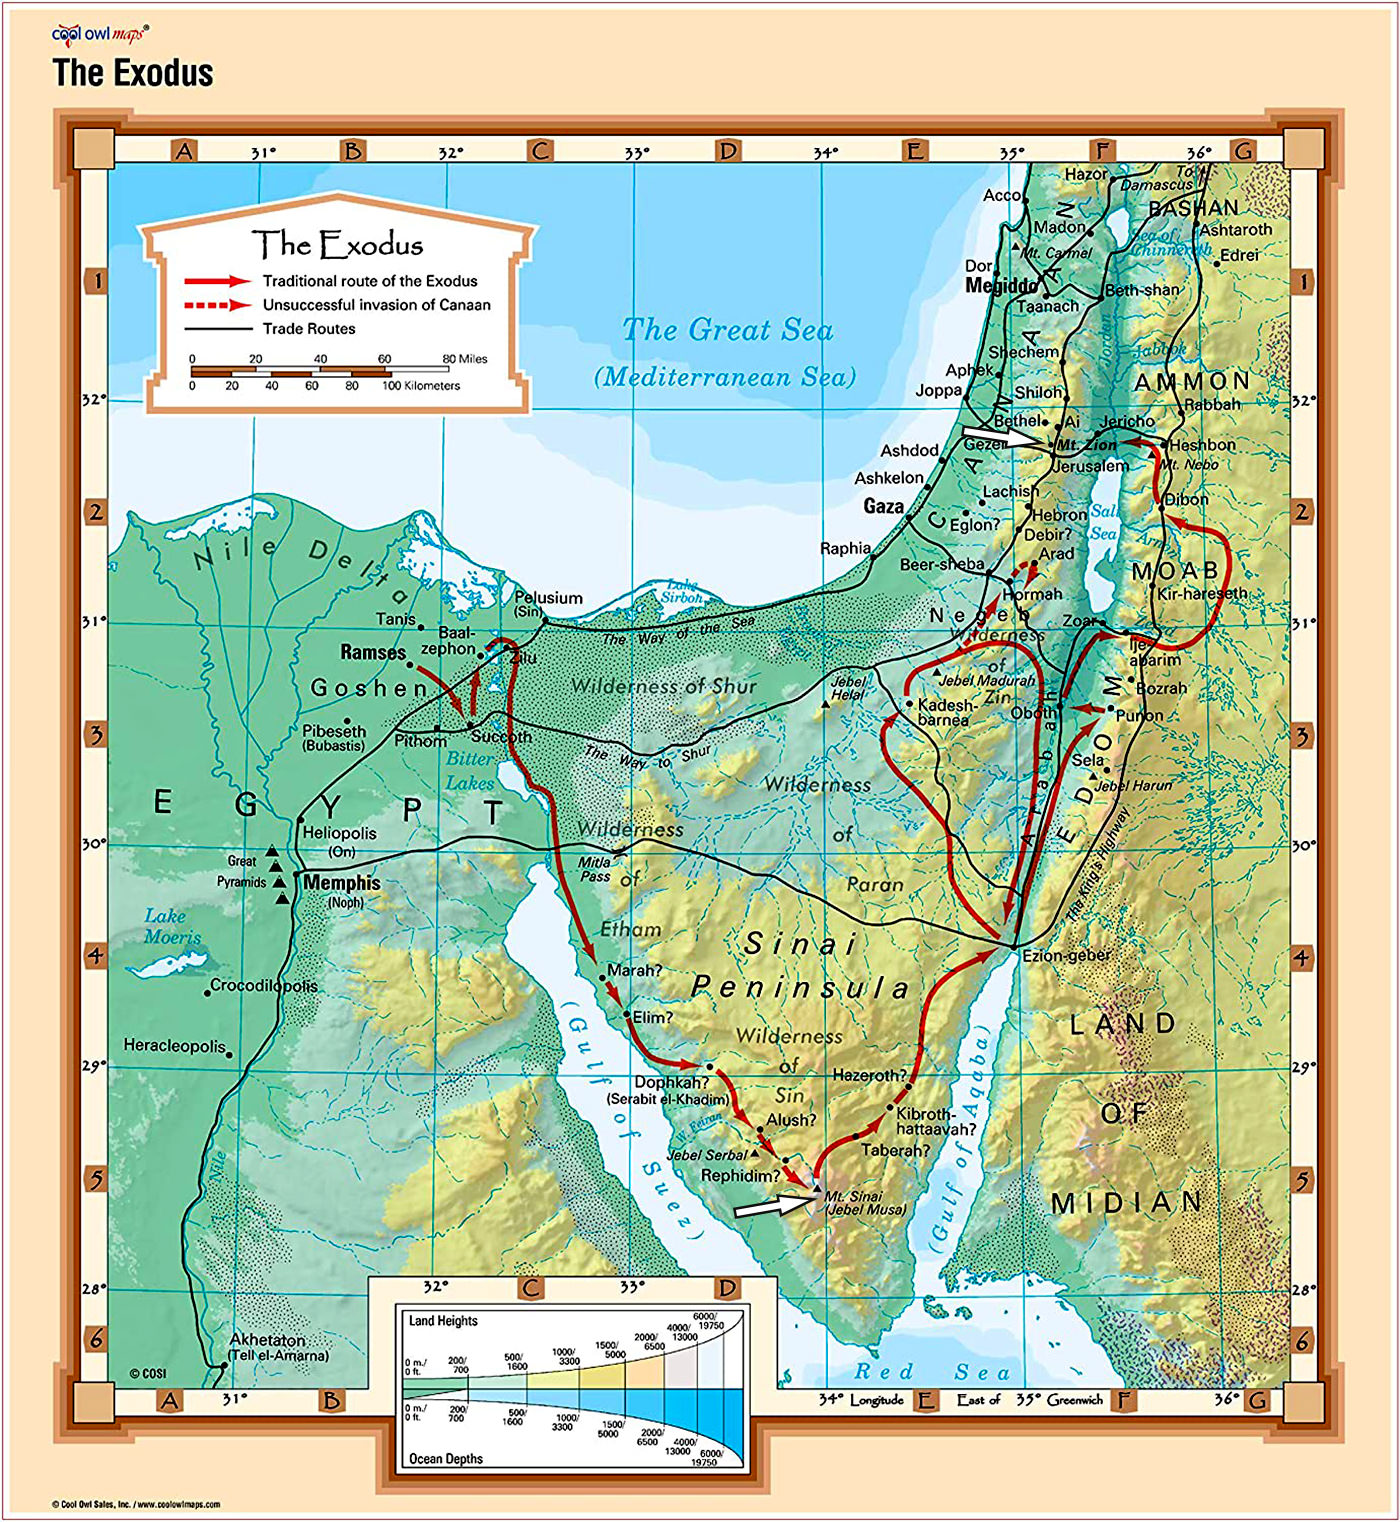 This map highlights where Mount Sinai and Mount Zion are located.